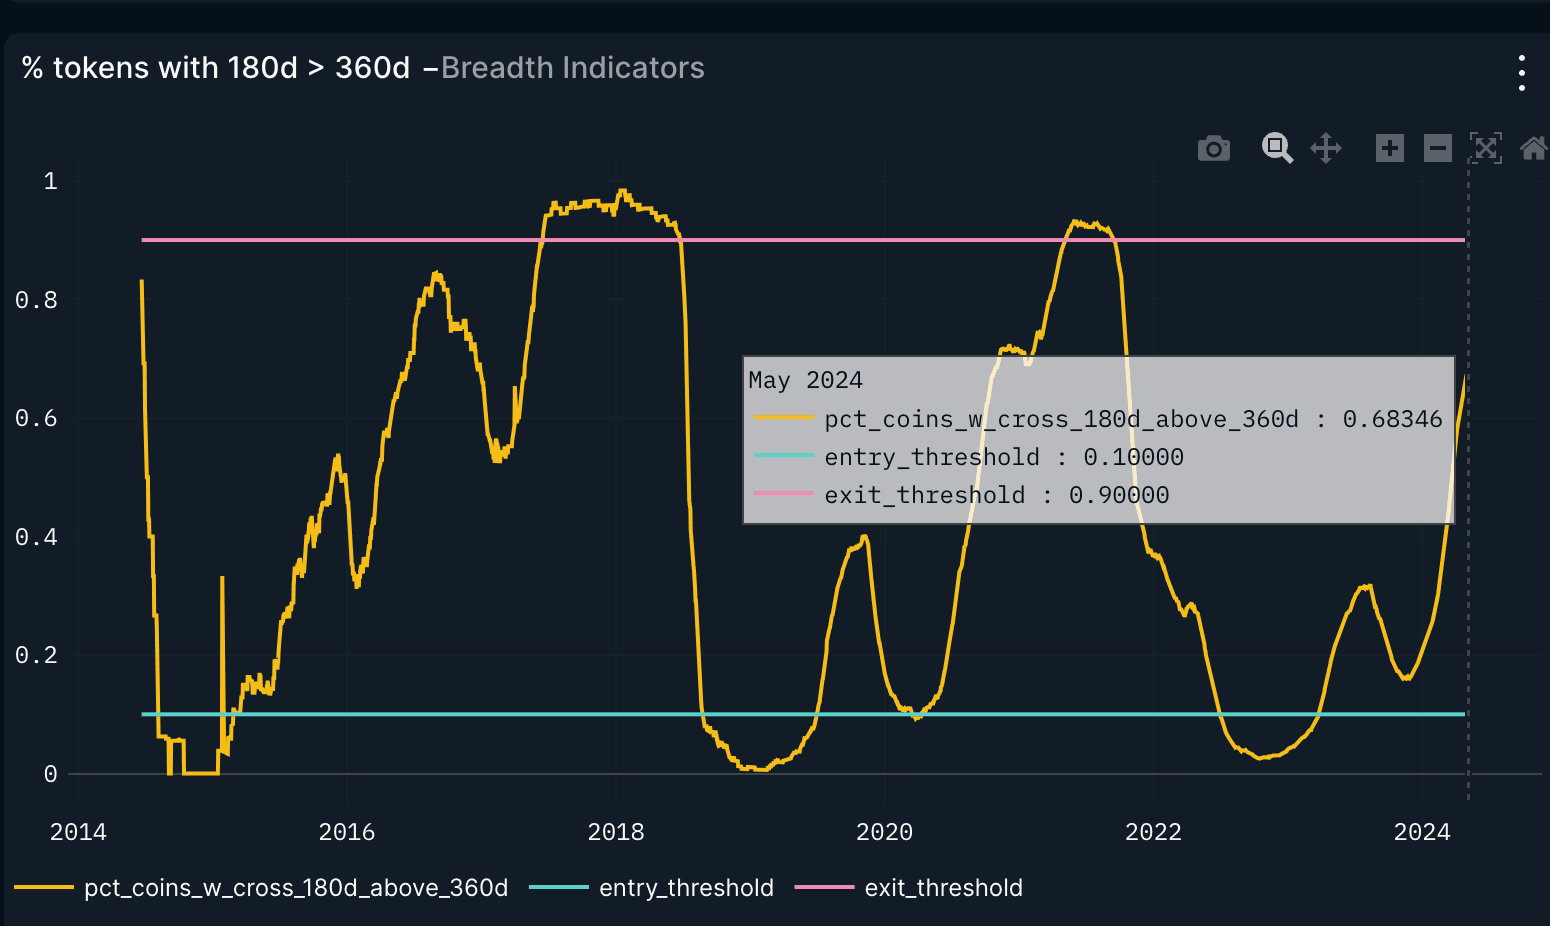 Breadth Indicator says we are 68% through the Crypto Bull cycle